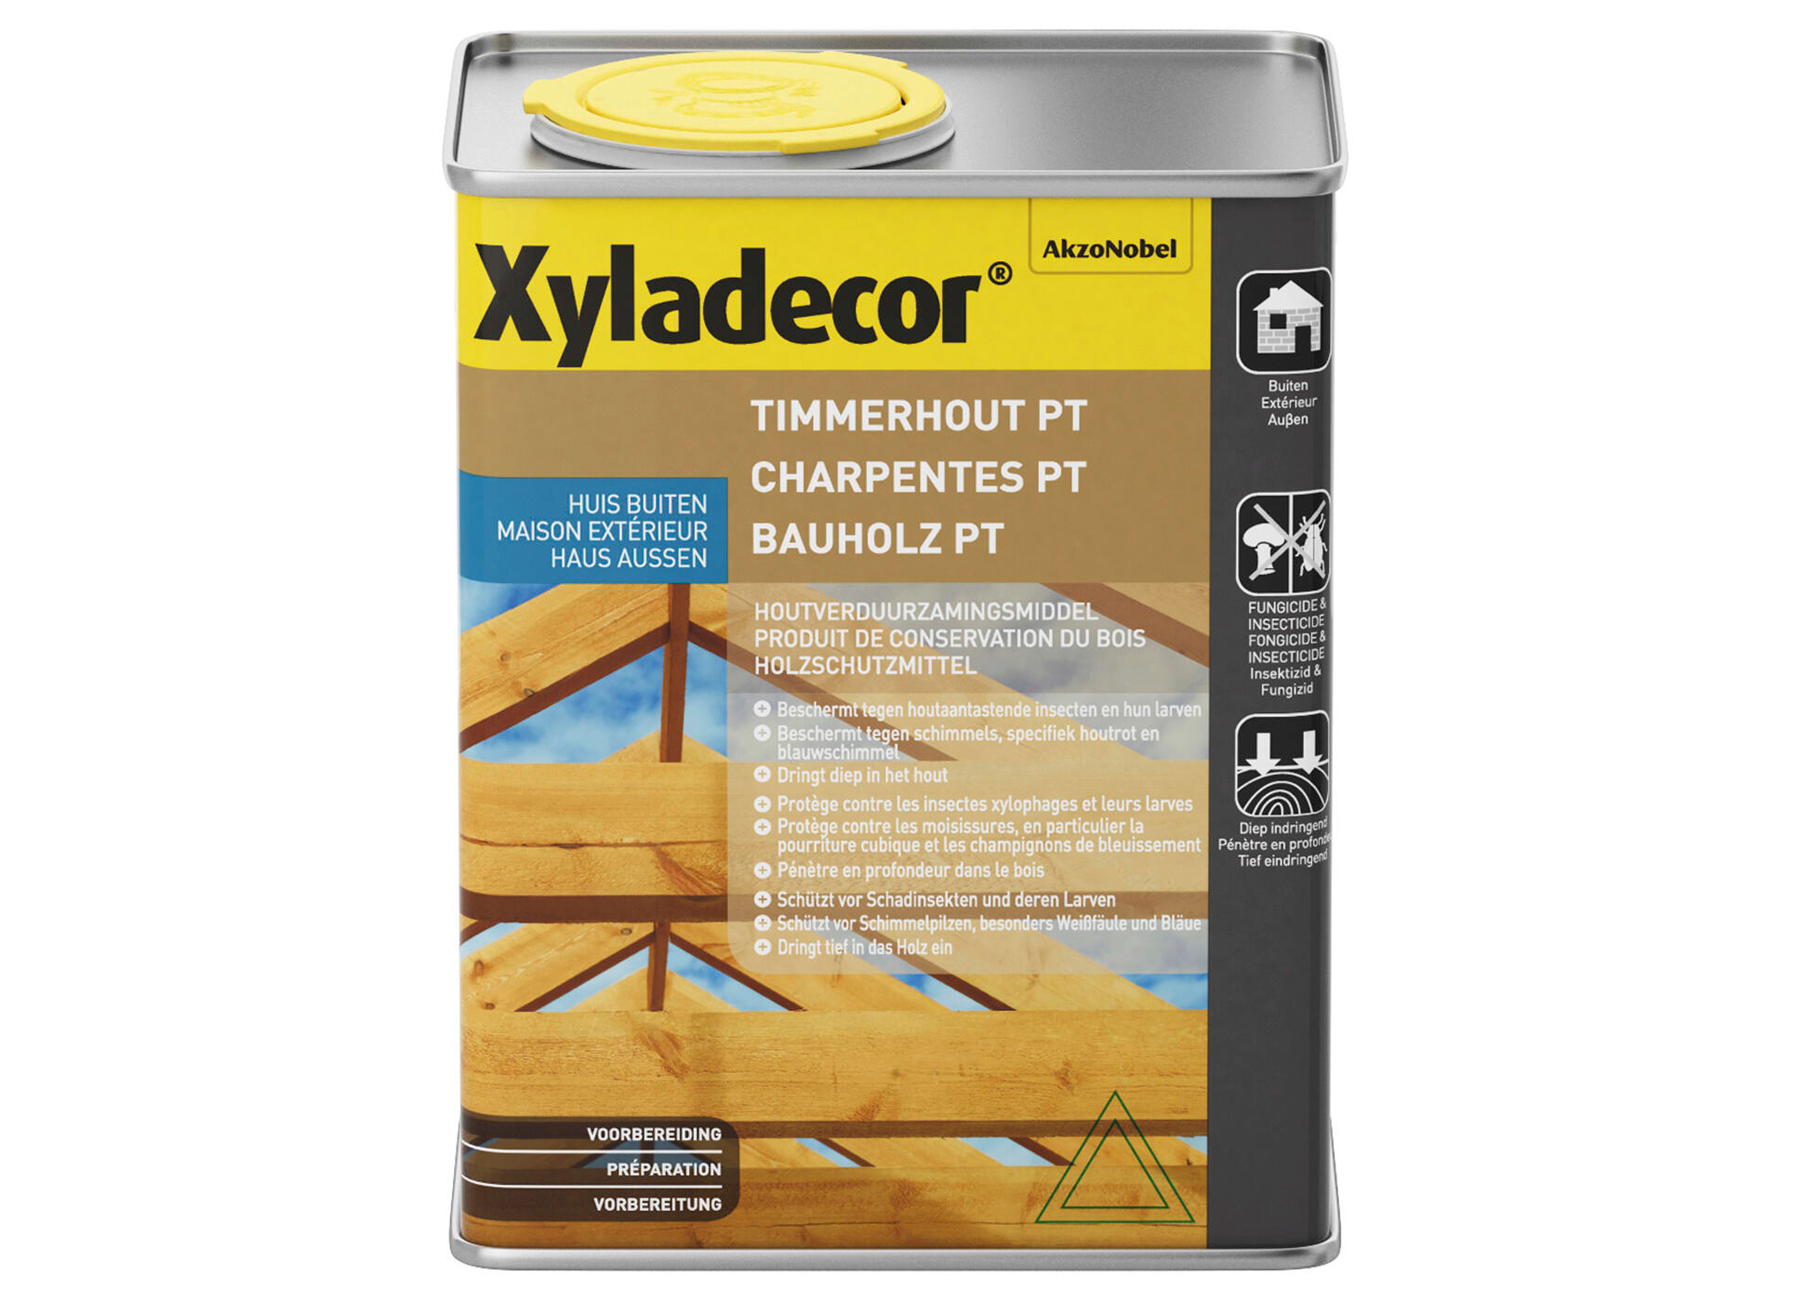 XYLADECOR TIMMERHOUT PT